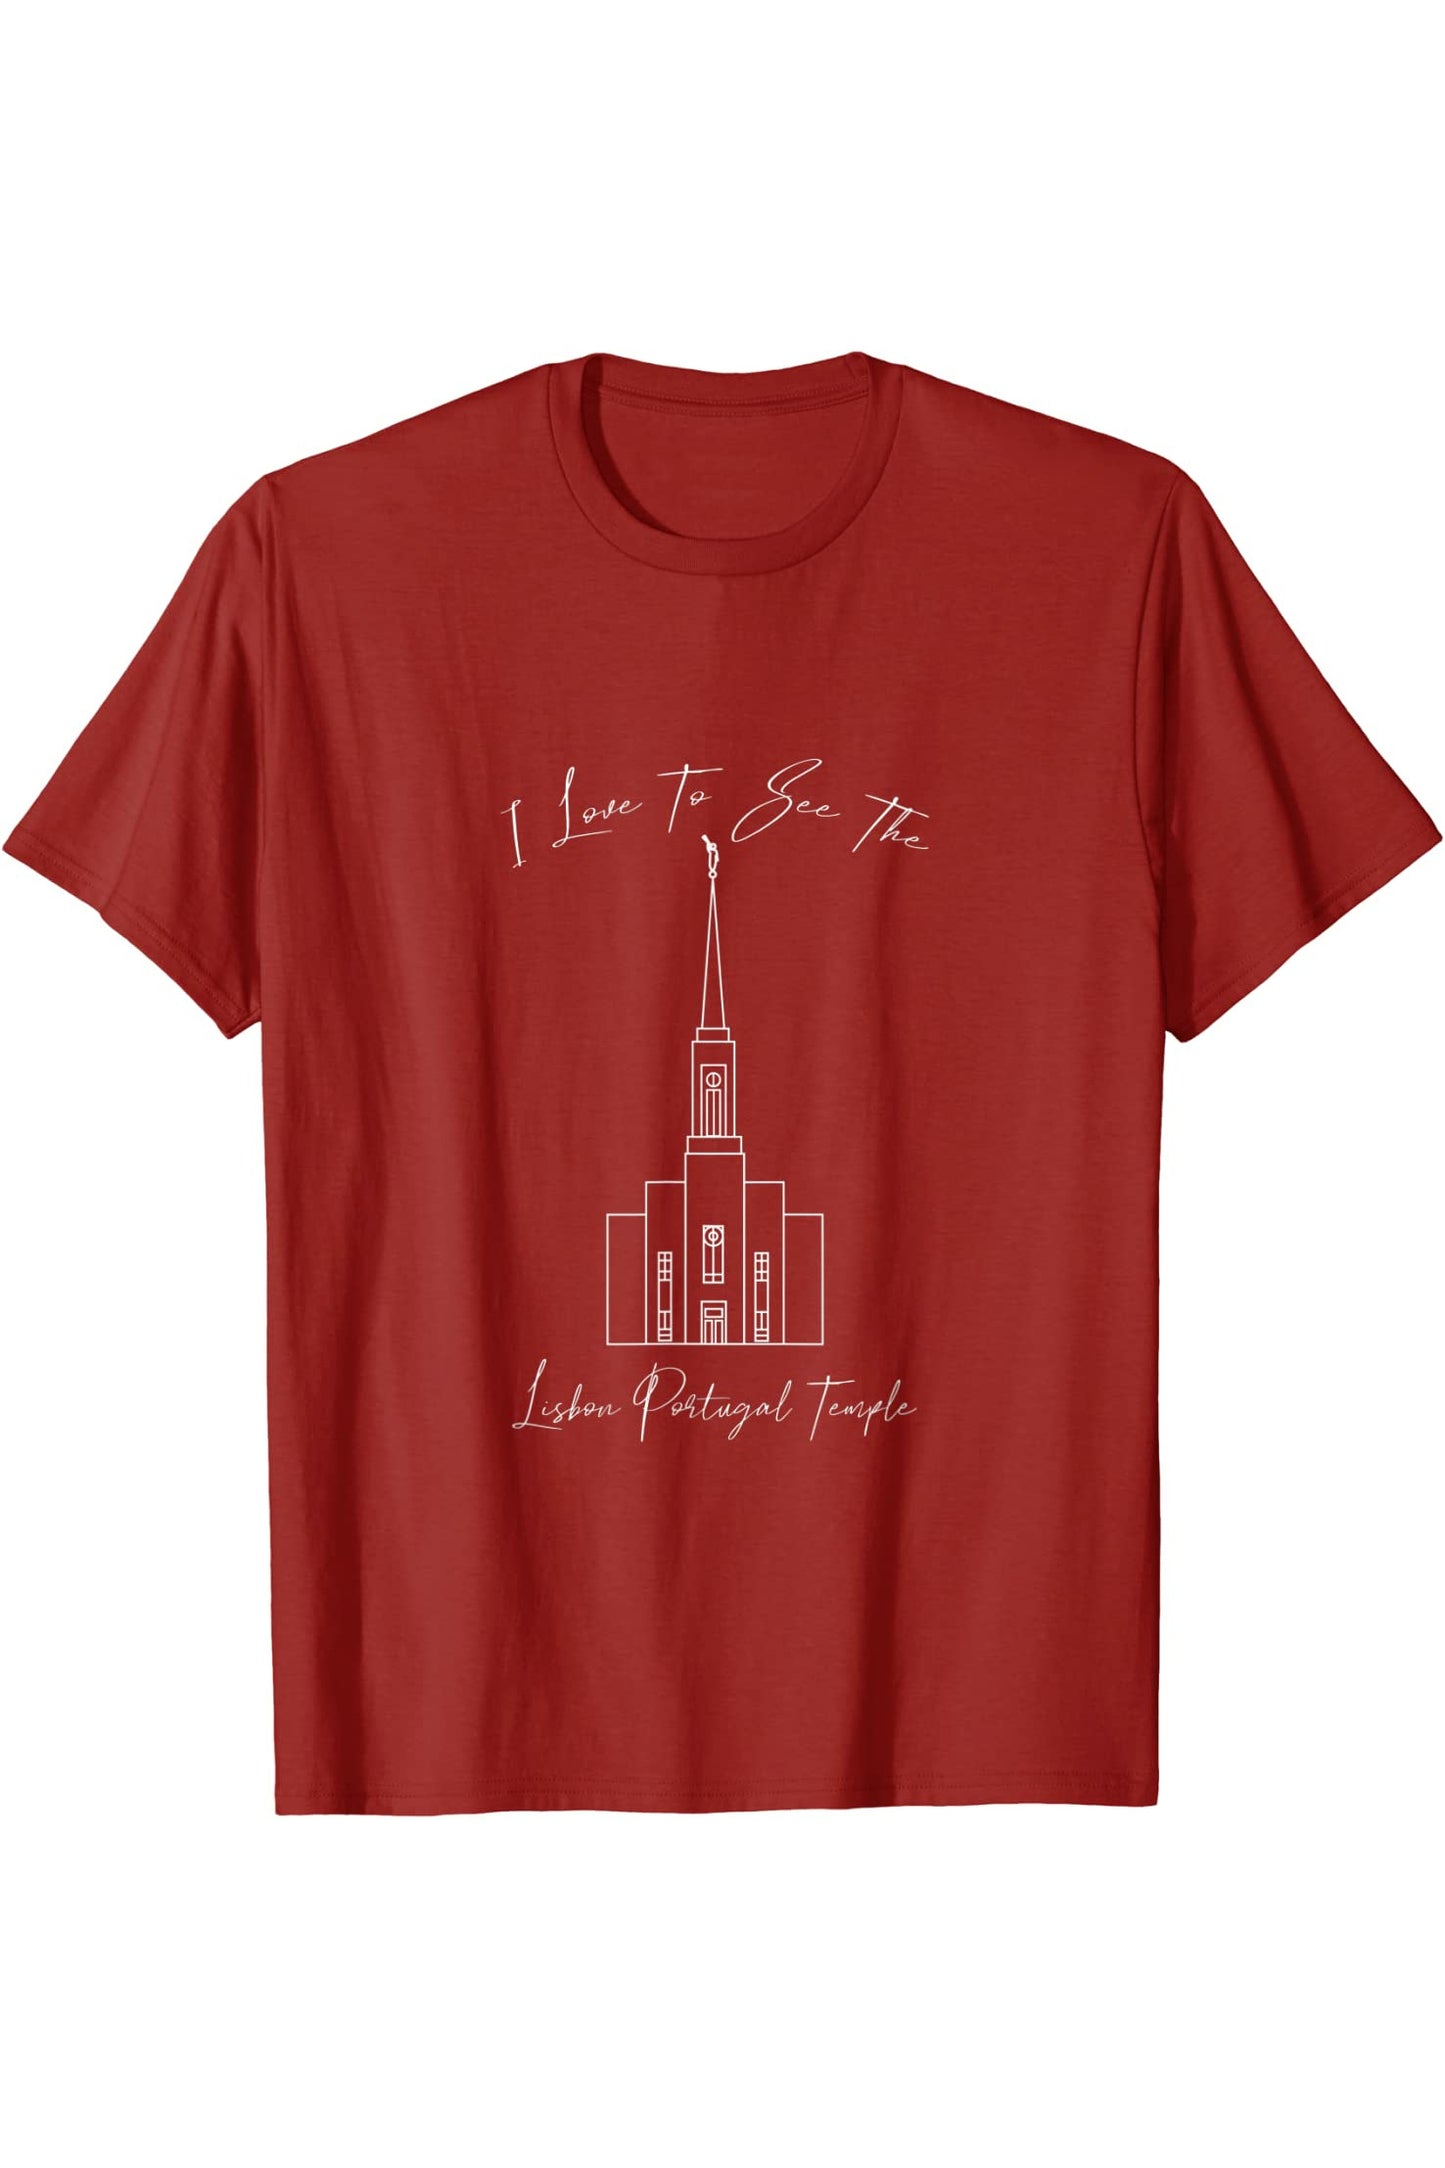 Lisbon Portugal Temple T-Shirt - Calligraphy Style (English) US